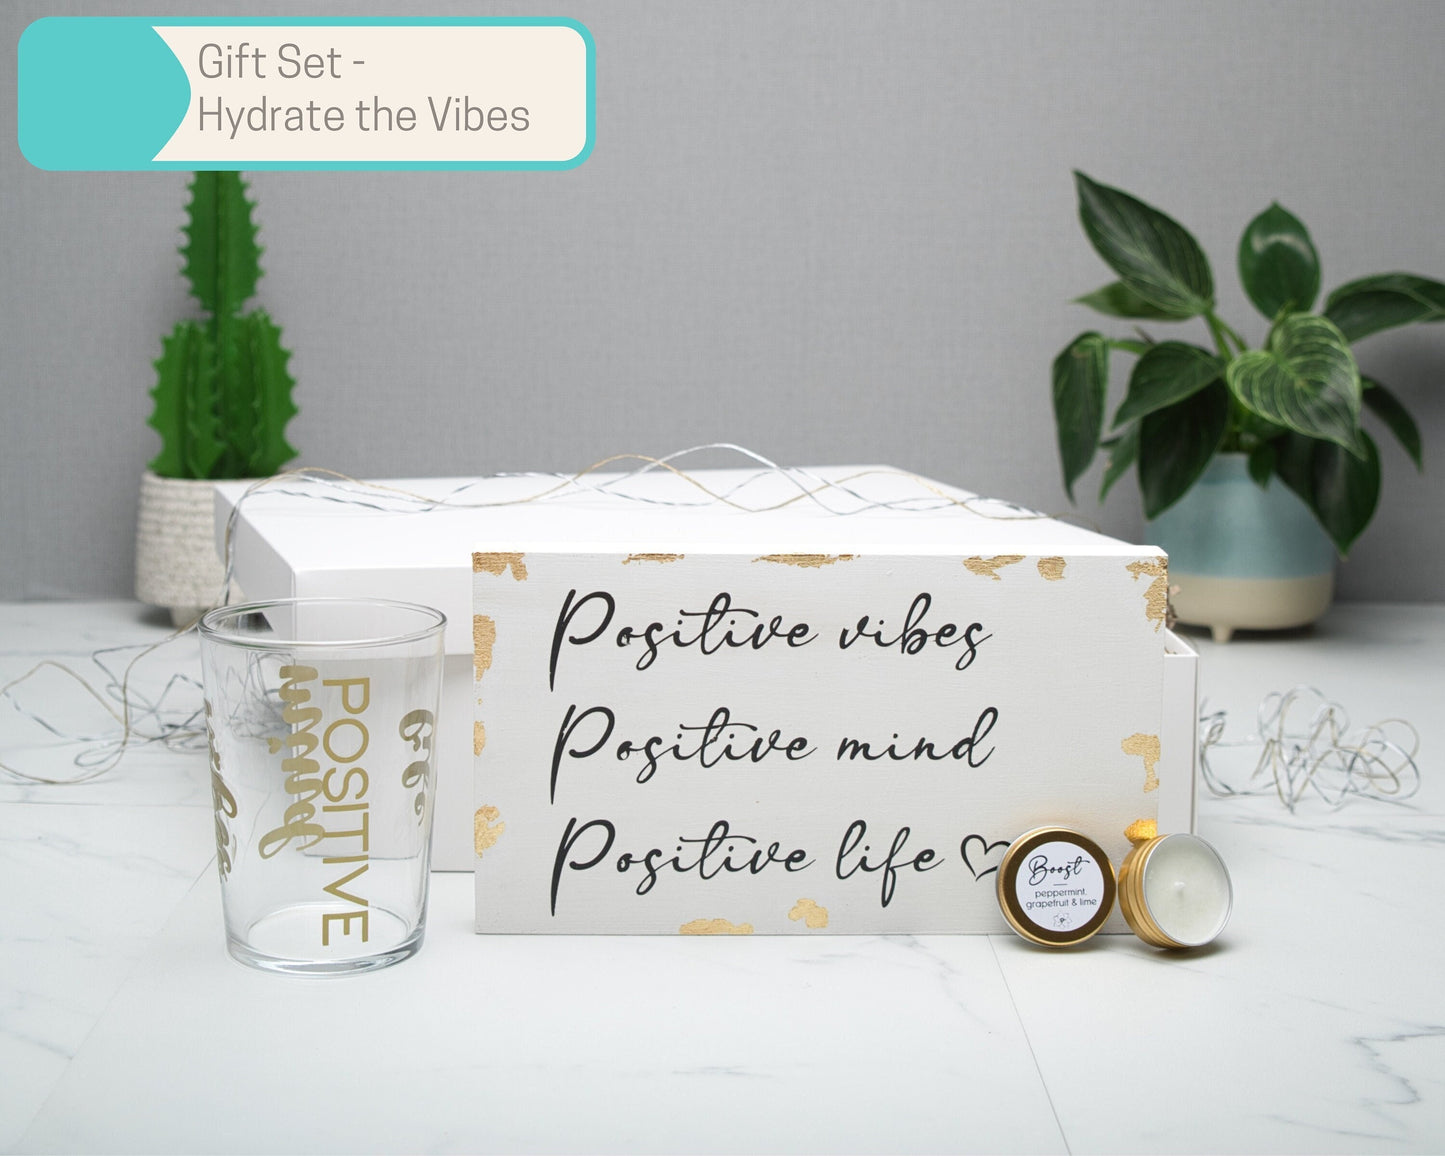 Wood Block Gift Set Positive Vibes Mind Life with Aromatherapy Candle & 500ml Glass Tumbler, Self Care Inspirational Quotes, Handmade Gift